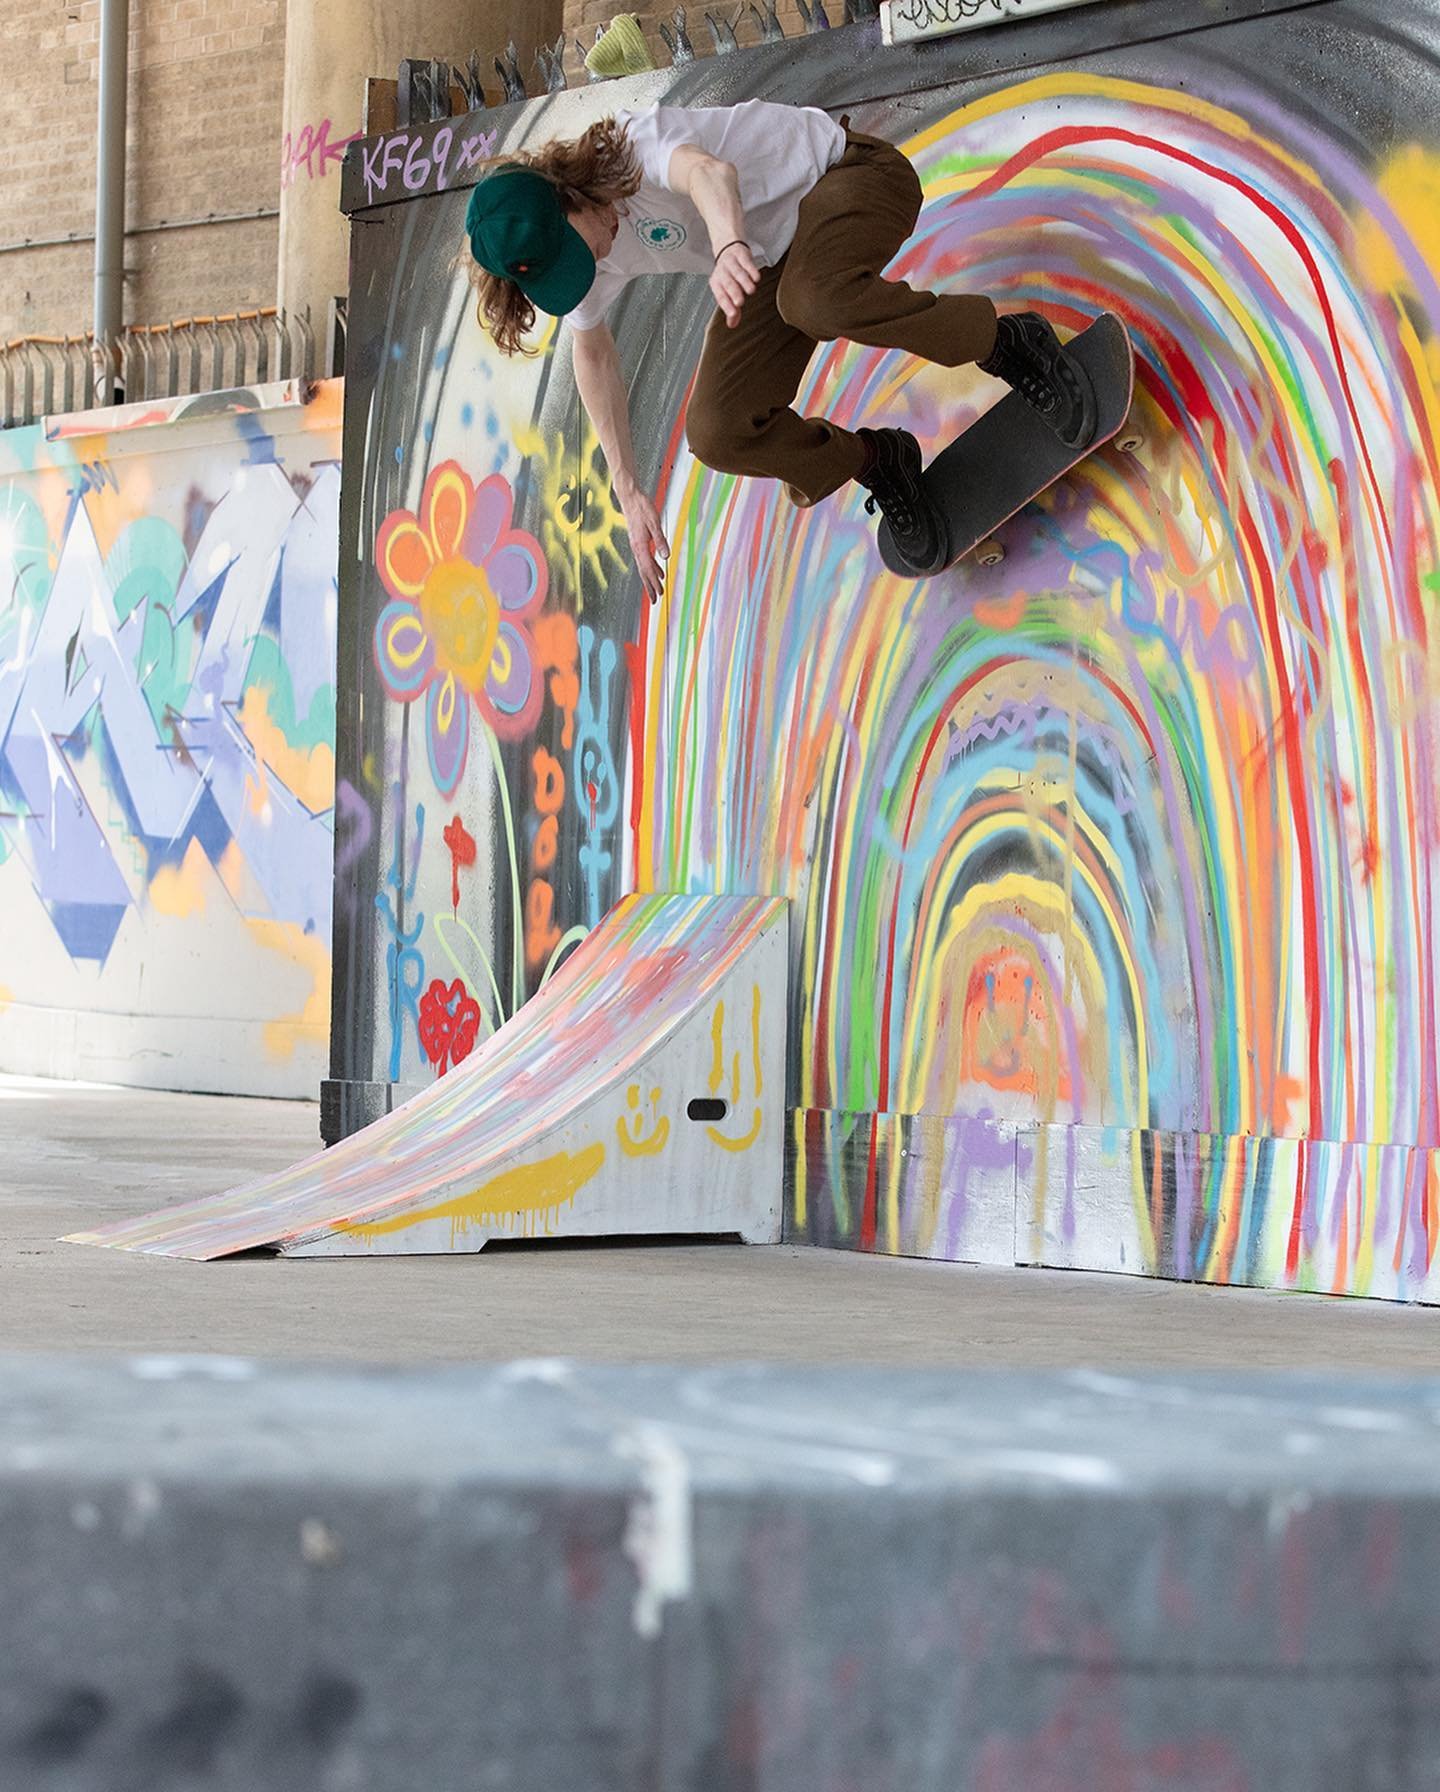 Nick rides the rainbow after his Creative Club workshop last week, in which young skaters learned how to use spray paint at @tramlinespot!⁣
⁣
Our weekly skate coaching (10:30 - 12:00 every Saturday) and our Creative Club workshops (12:00 - 13:00 for 